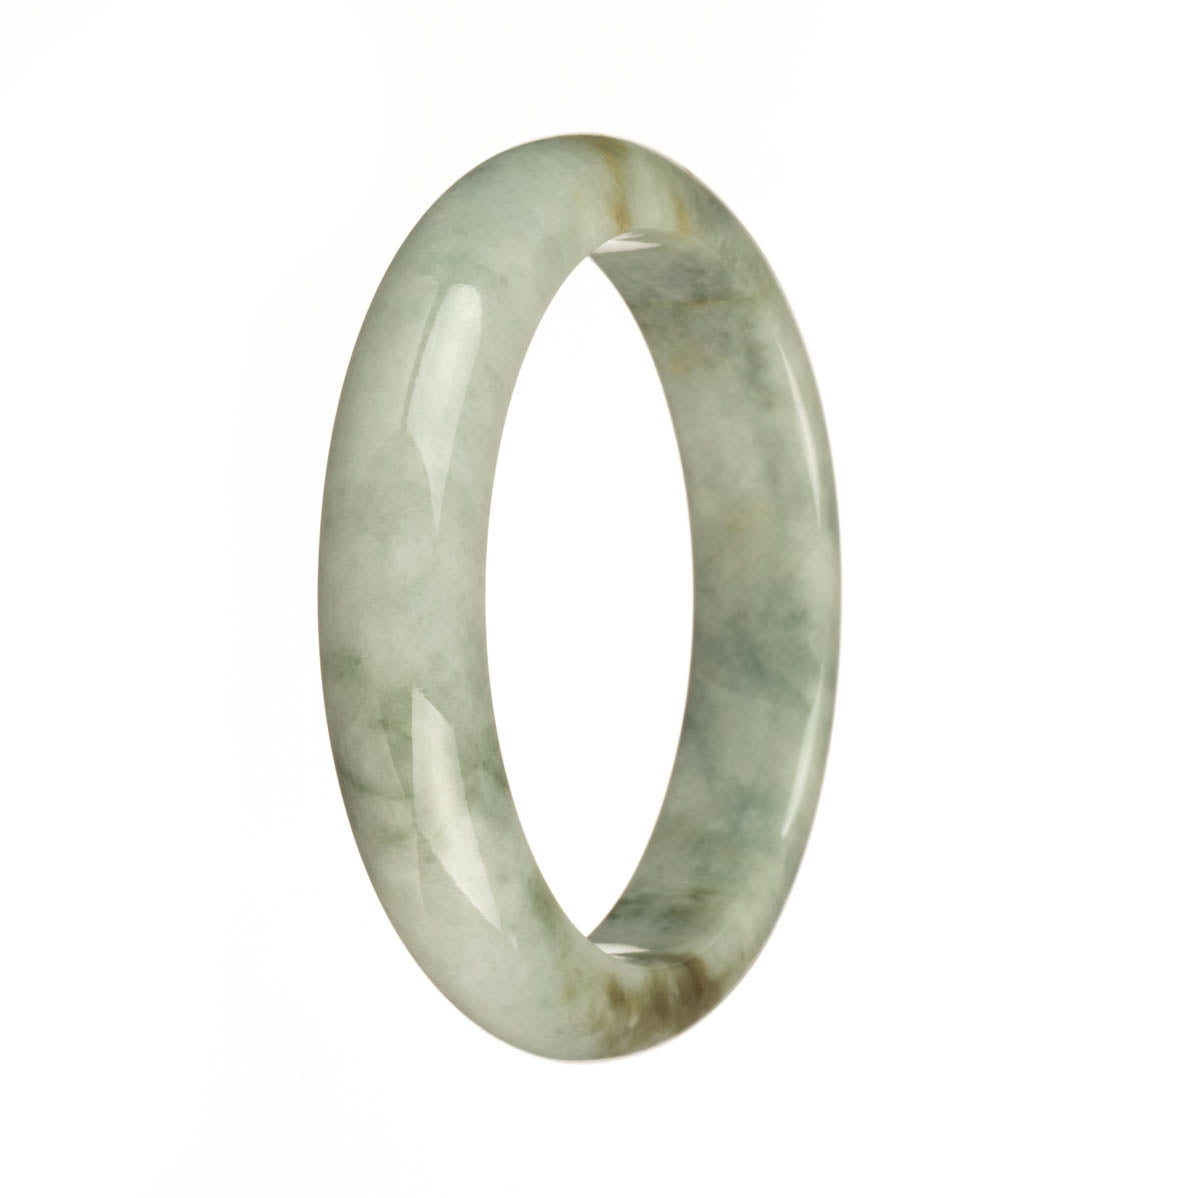 An untreated pale green jade bangle bracelet with dark green and brown patches, featuring a traditional half moon shape.